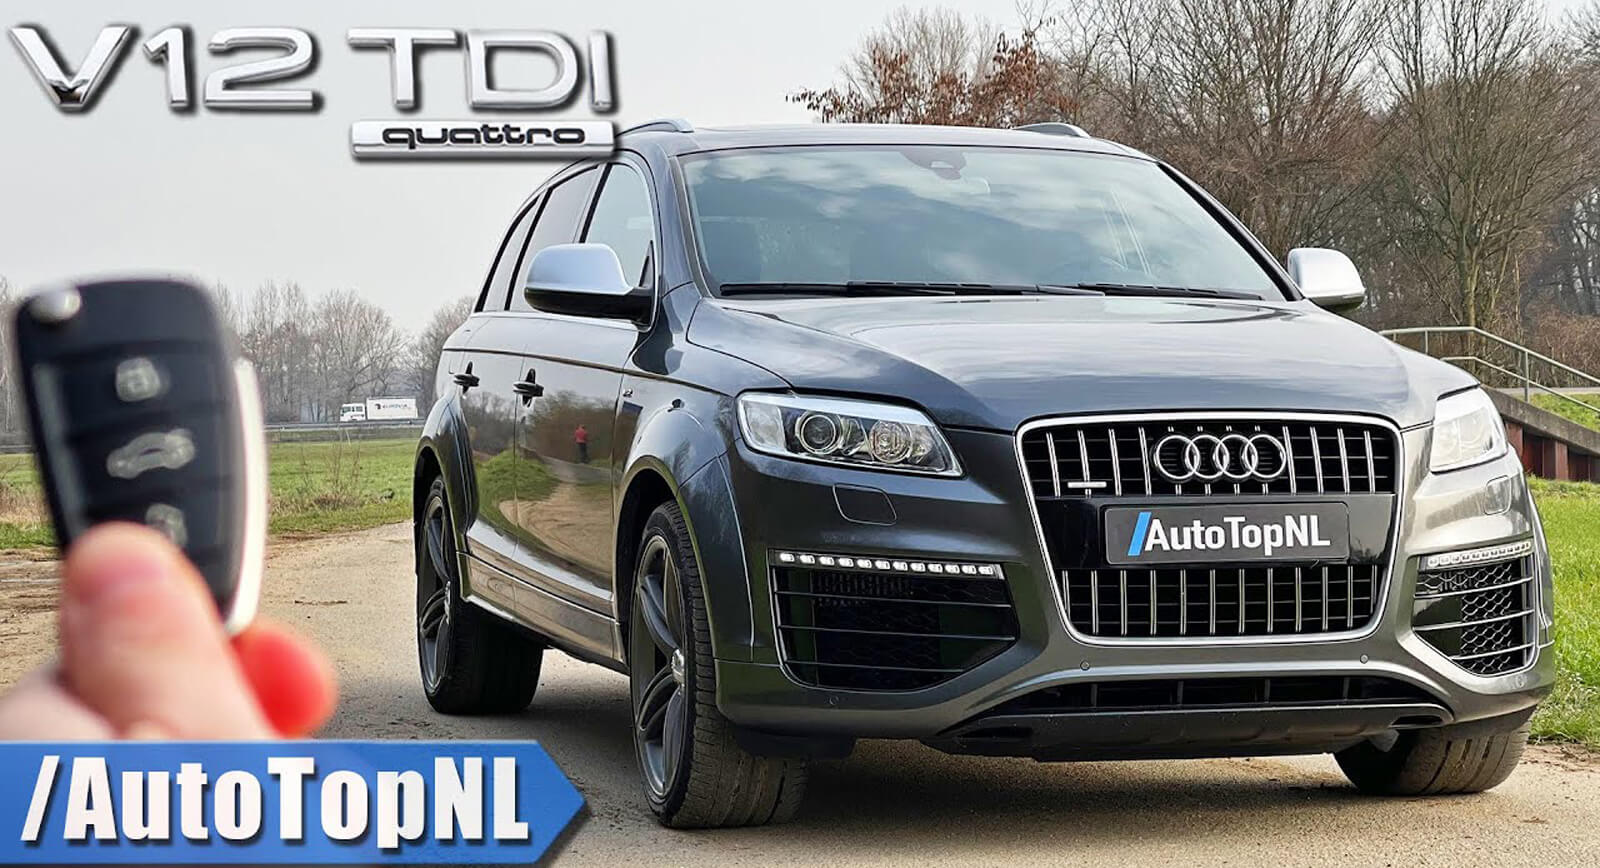 Audi Q7 V12 TDI Is A Diesel-Powered Torque Monster From A Bygone Period Auto Recent